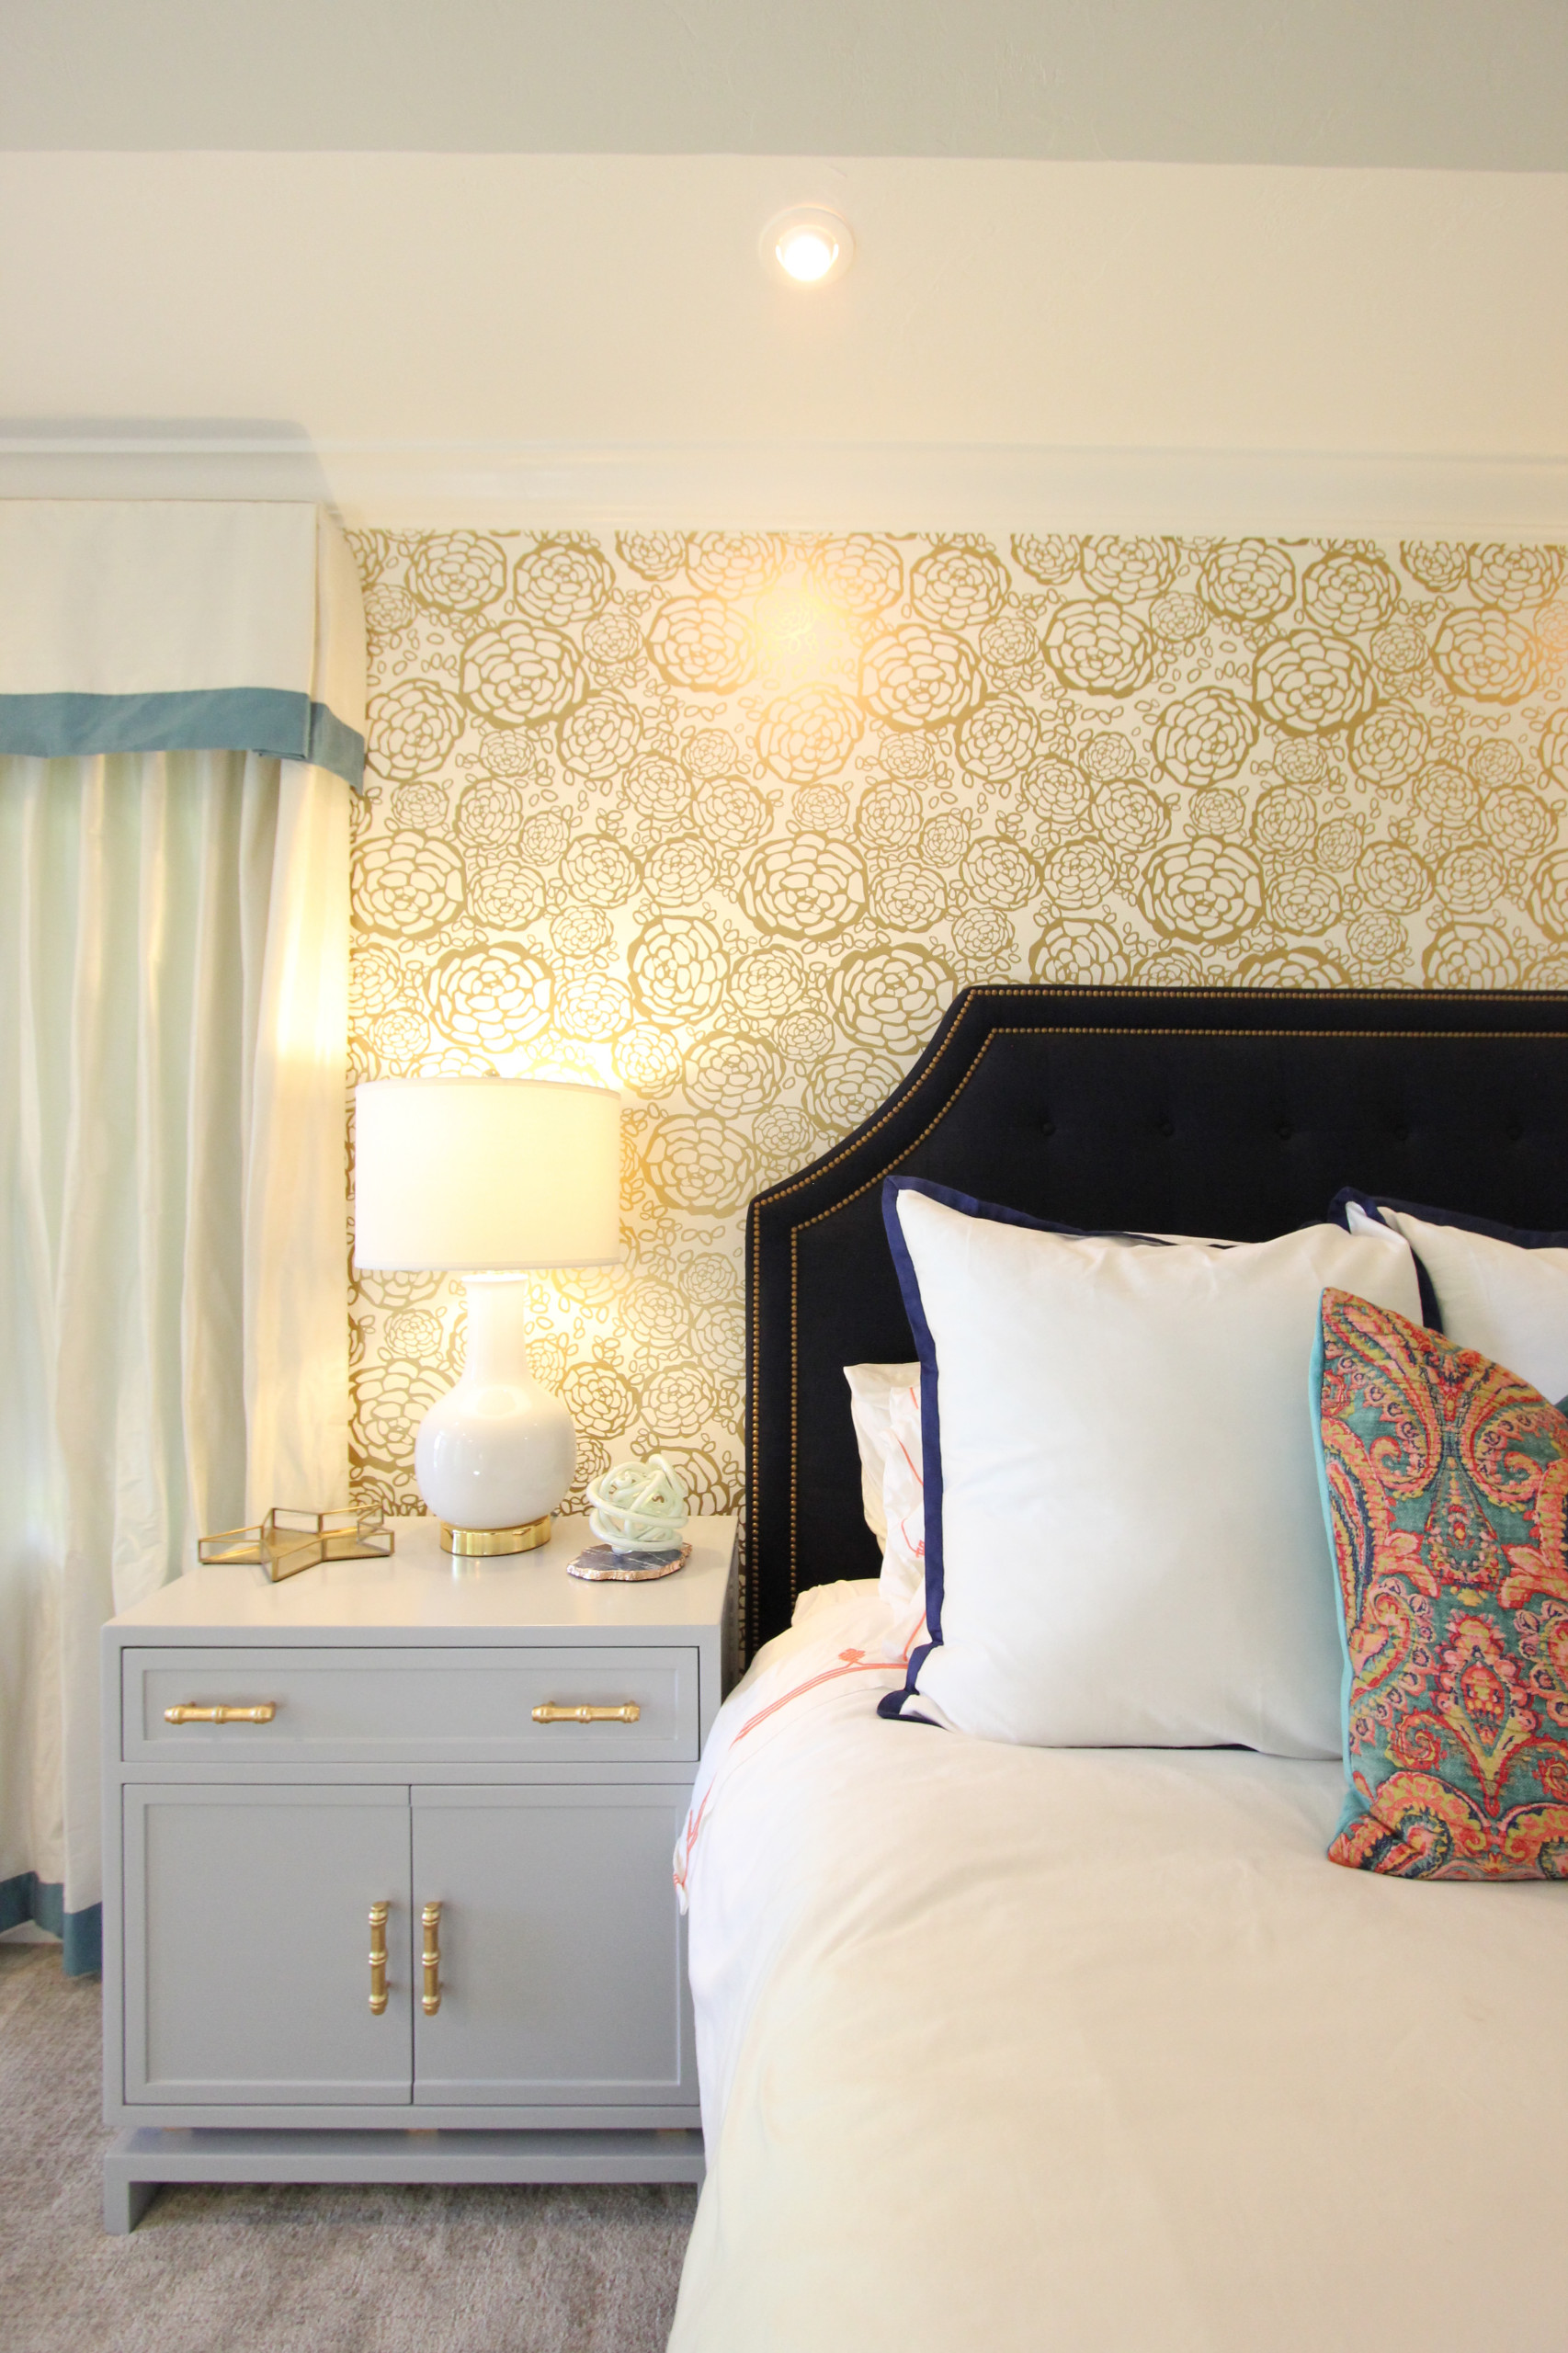 Tory Burch + Kate Spade Inspired Interior - Transitional - Bedroom - Tampa  - by BLU Interiors: Chelsea Dunbar | Houzz